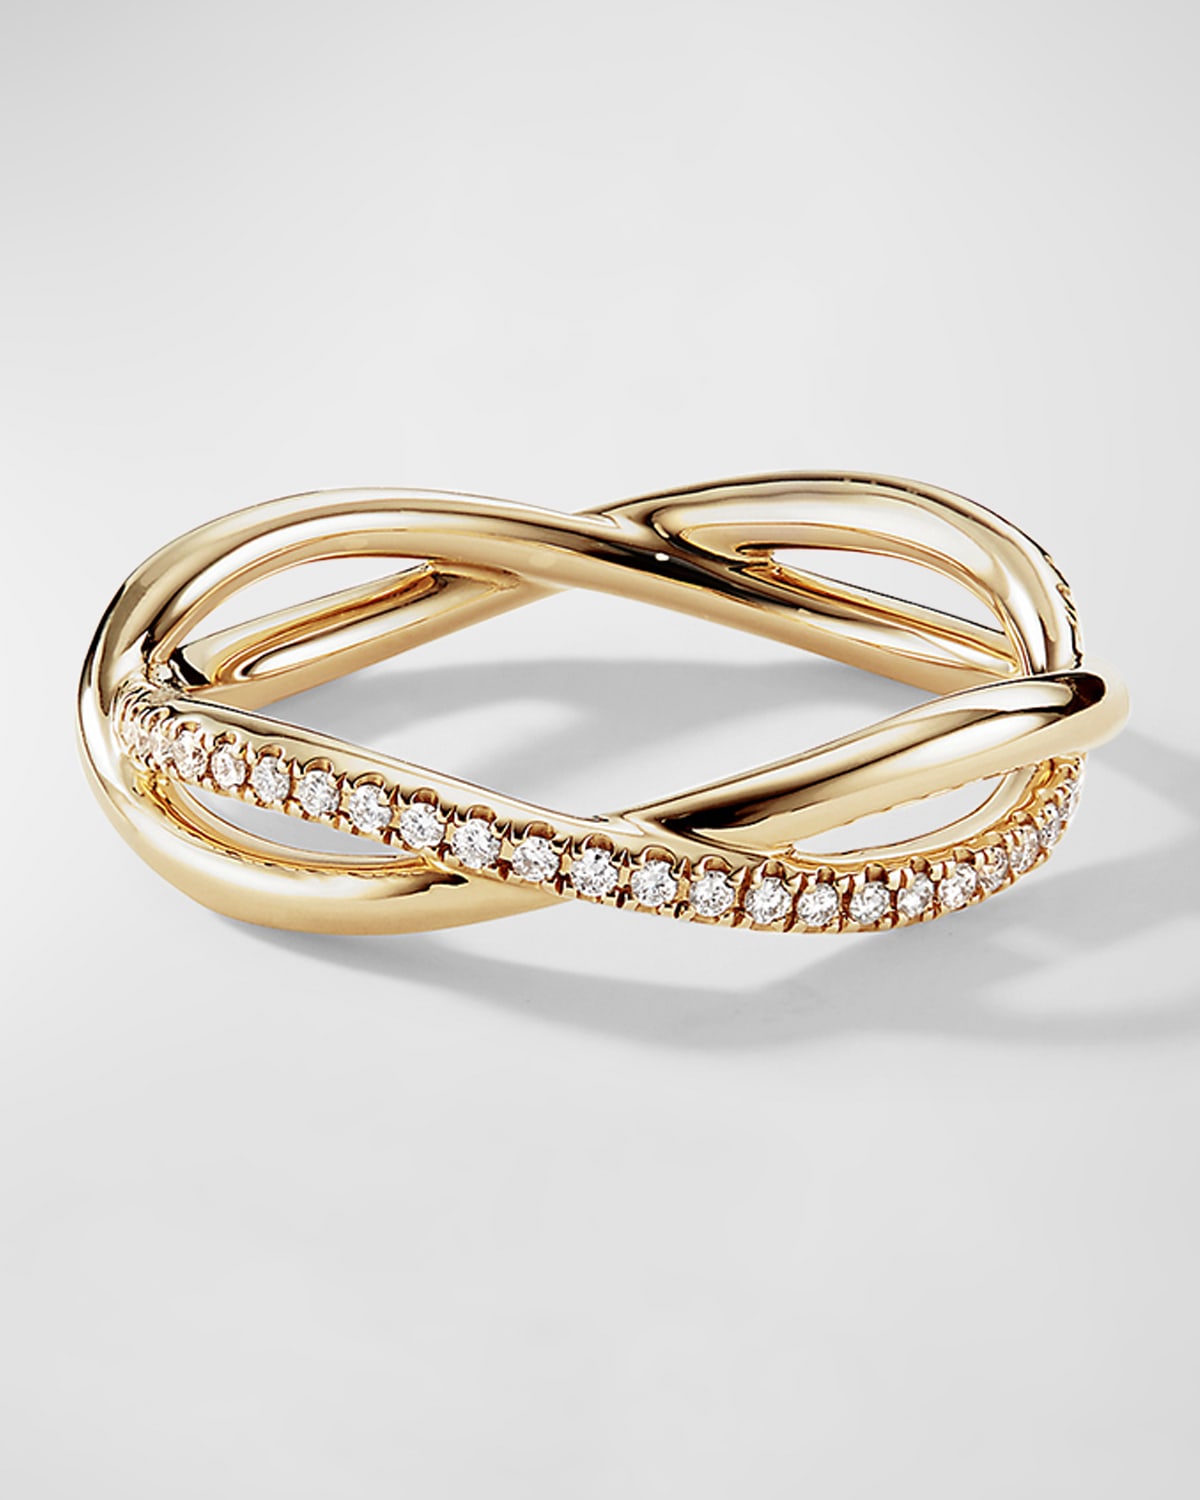 DY Lanai Band Ring with Diamonds in 18K Gold, 4.18mm